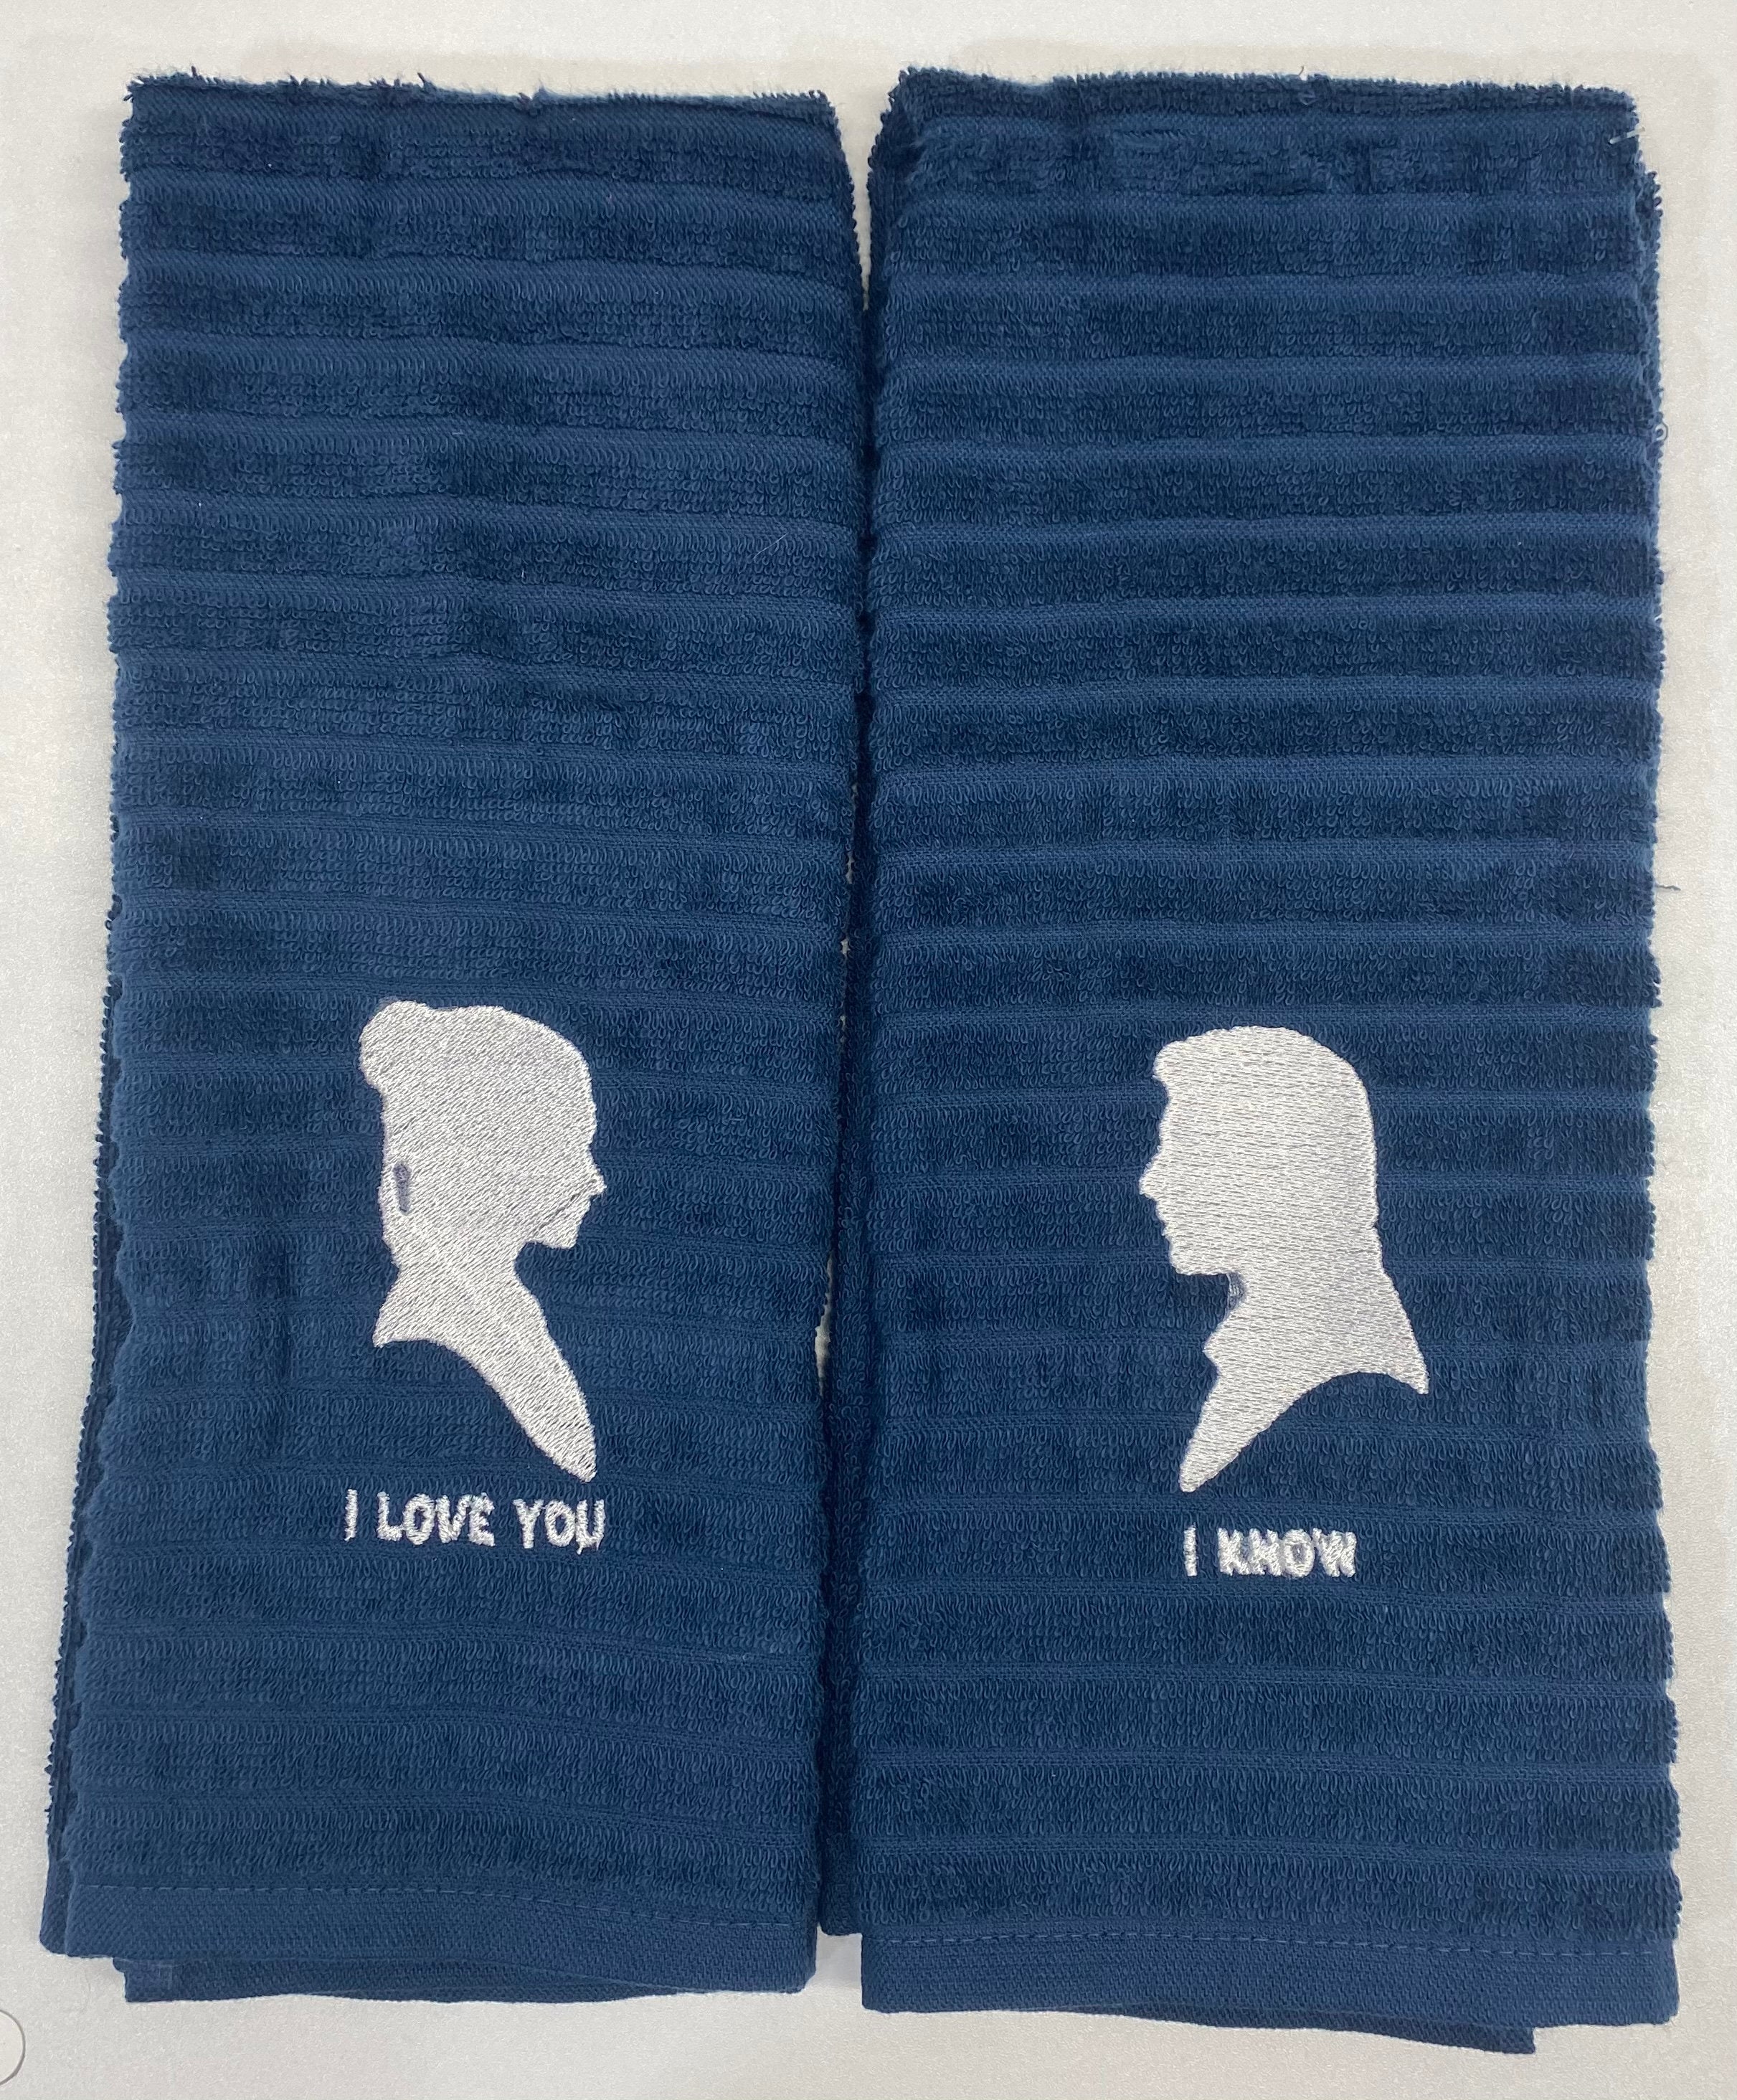 Star Wars Quotes - HomeTow Star Wars Hand Bathroom Towels